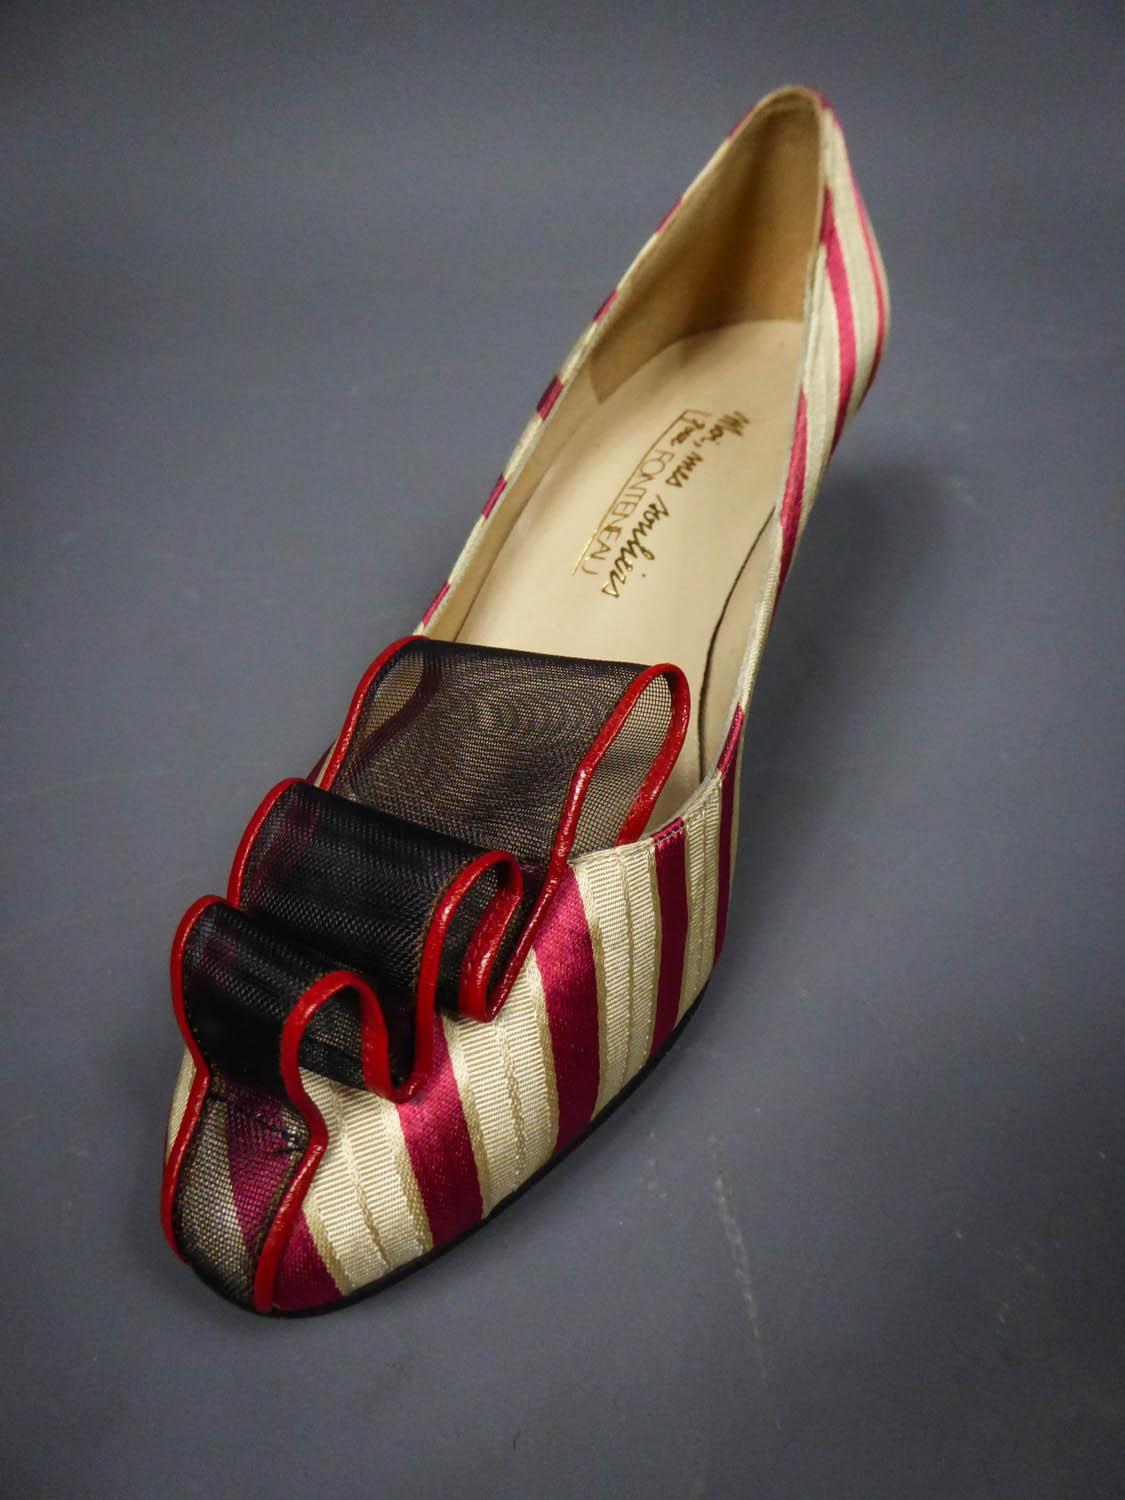 Women's Numbered Fonteneau French Heels Shoes Titled Moi, Mes Souliers Circa 1960